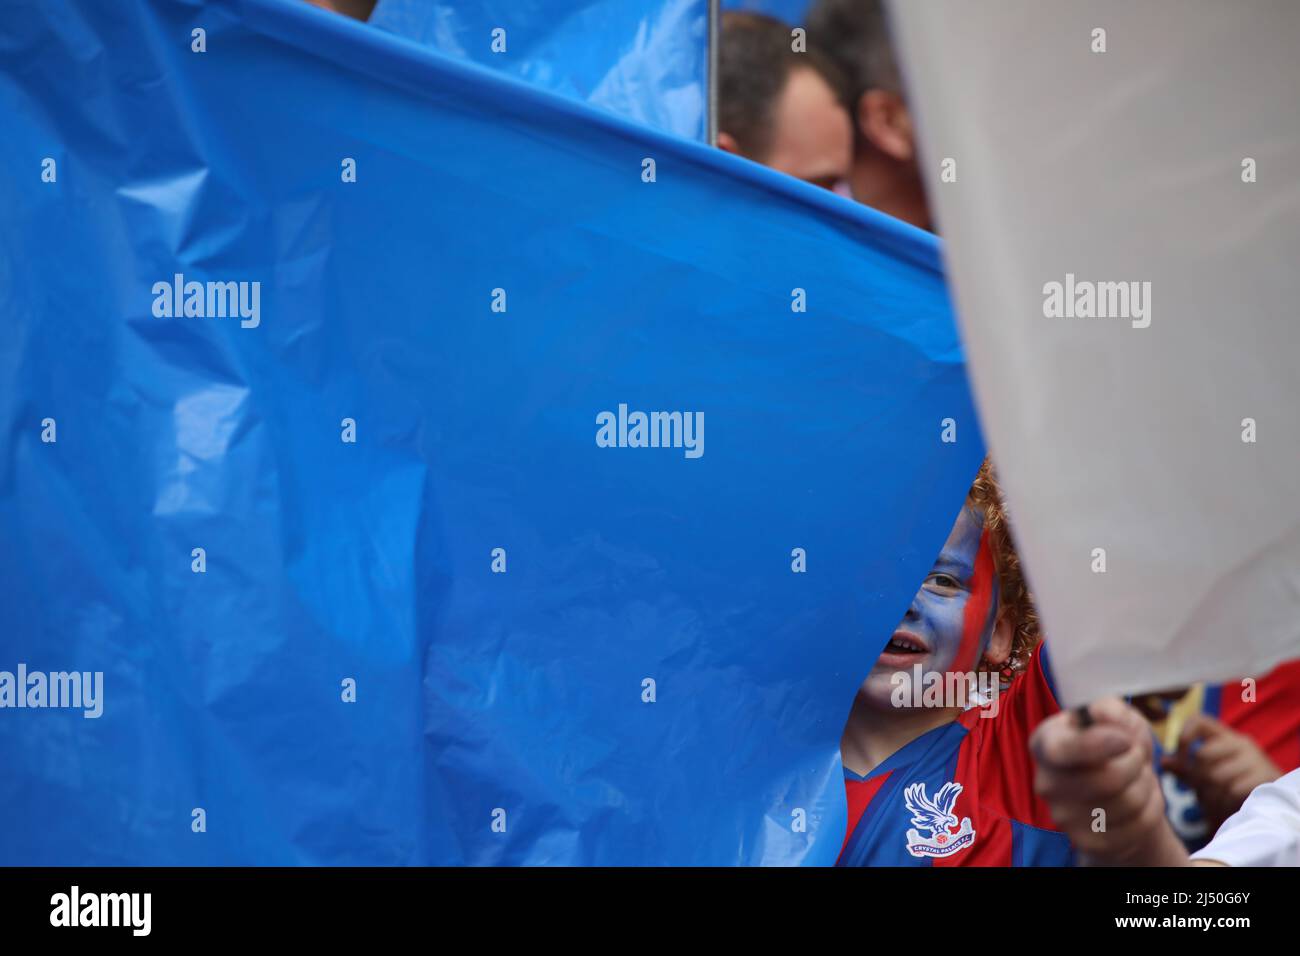 London, UK. 17th Apr, 2022. Palace fan at the Emirates FA Cup Semi-Final of Chelsea v Crystal Palace at Wembley Stadium, London, UK on 17th April 2022. Credit: Paul Marriott/Alamy Live News Stock Photo